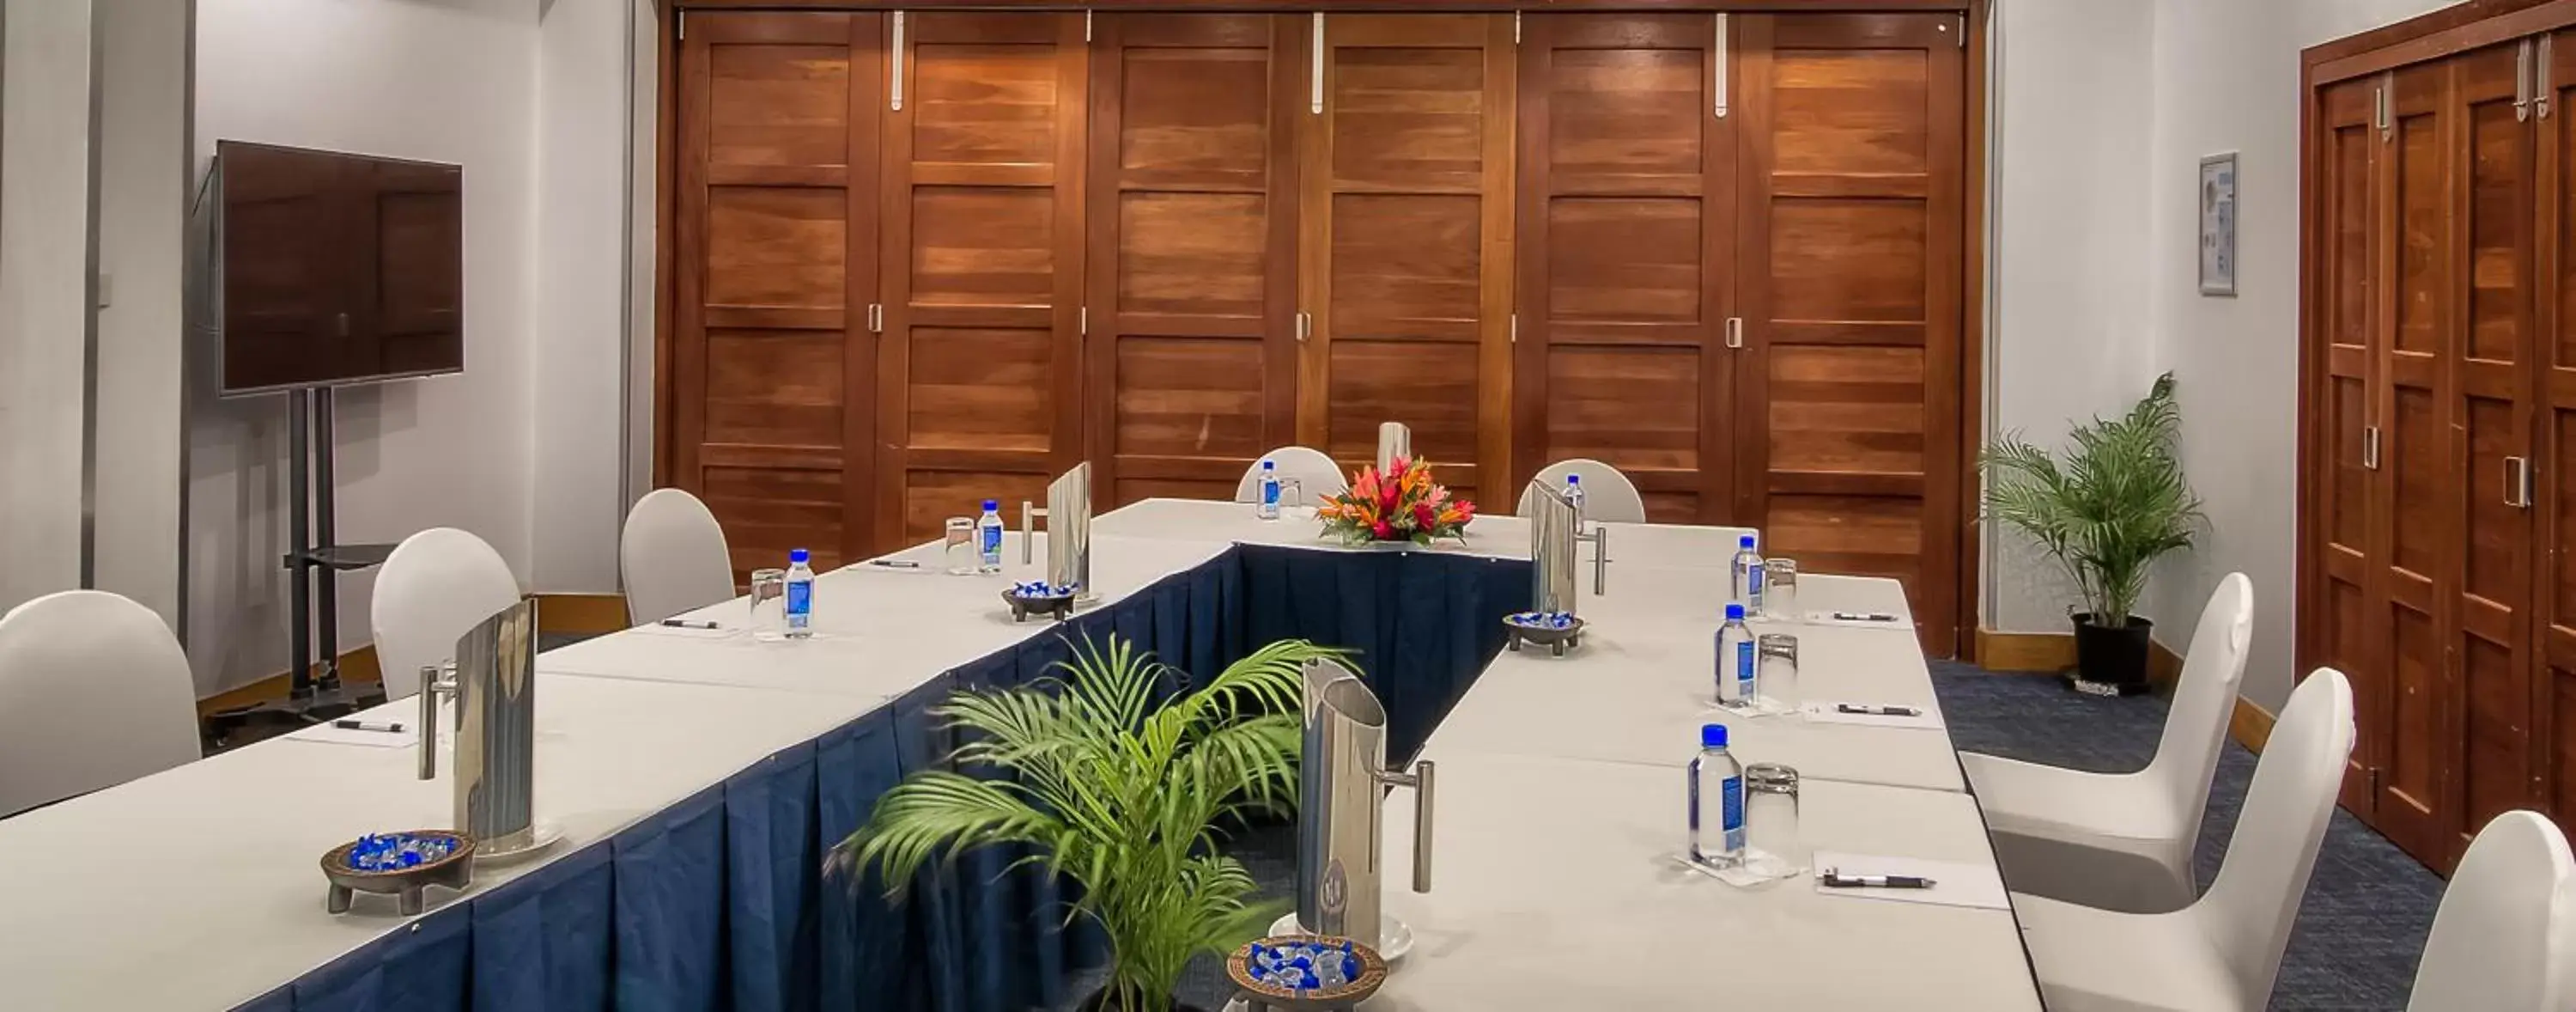 Meeting/conference room in Tanoa Plaza Hotel